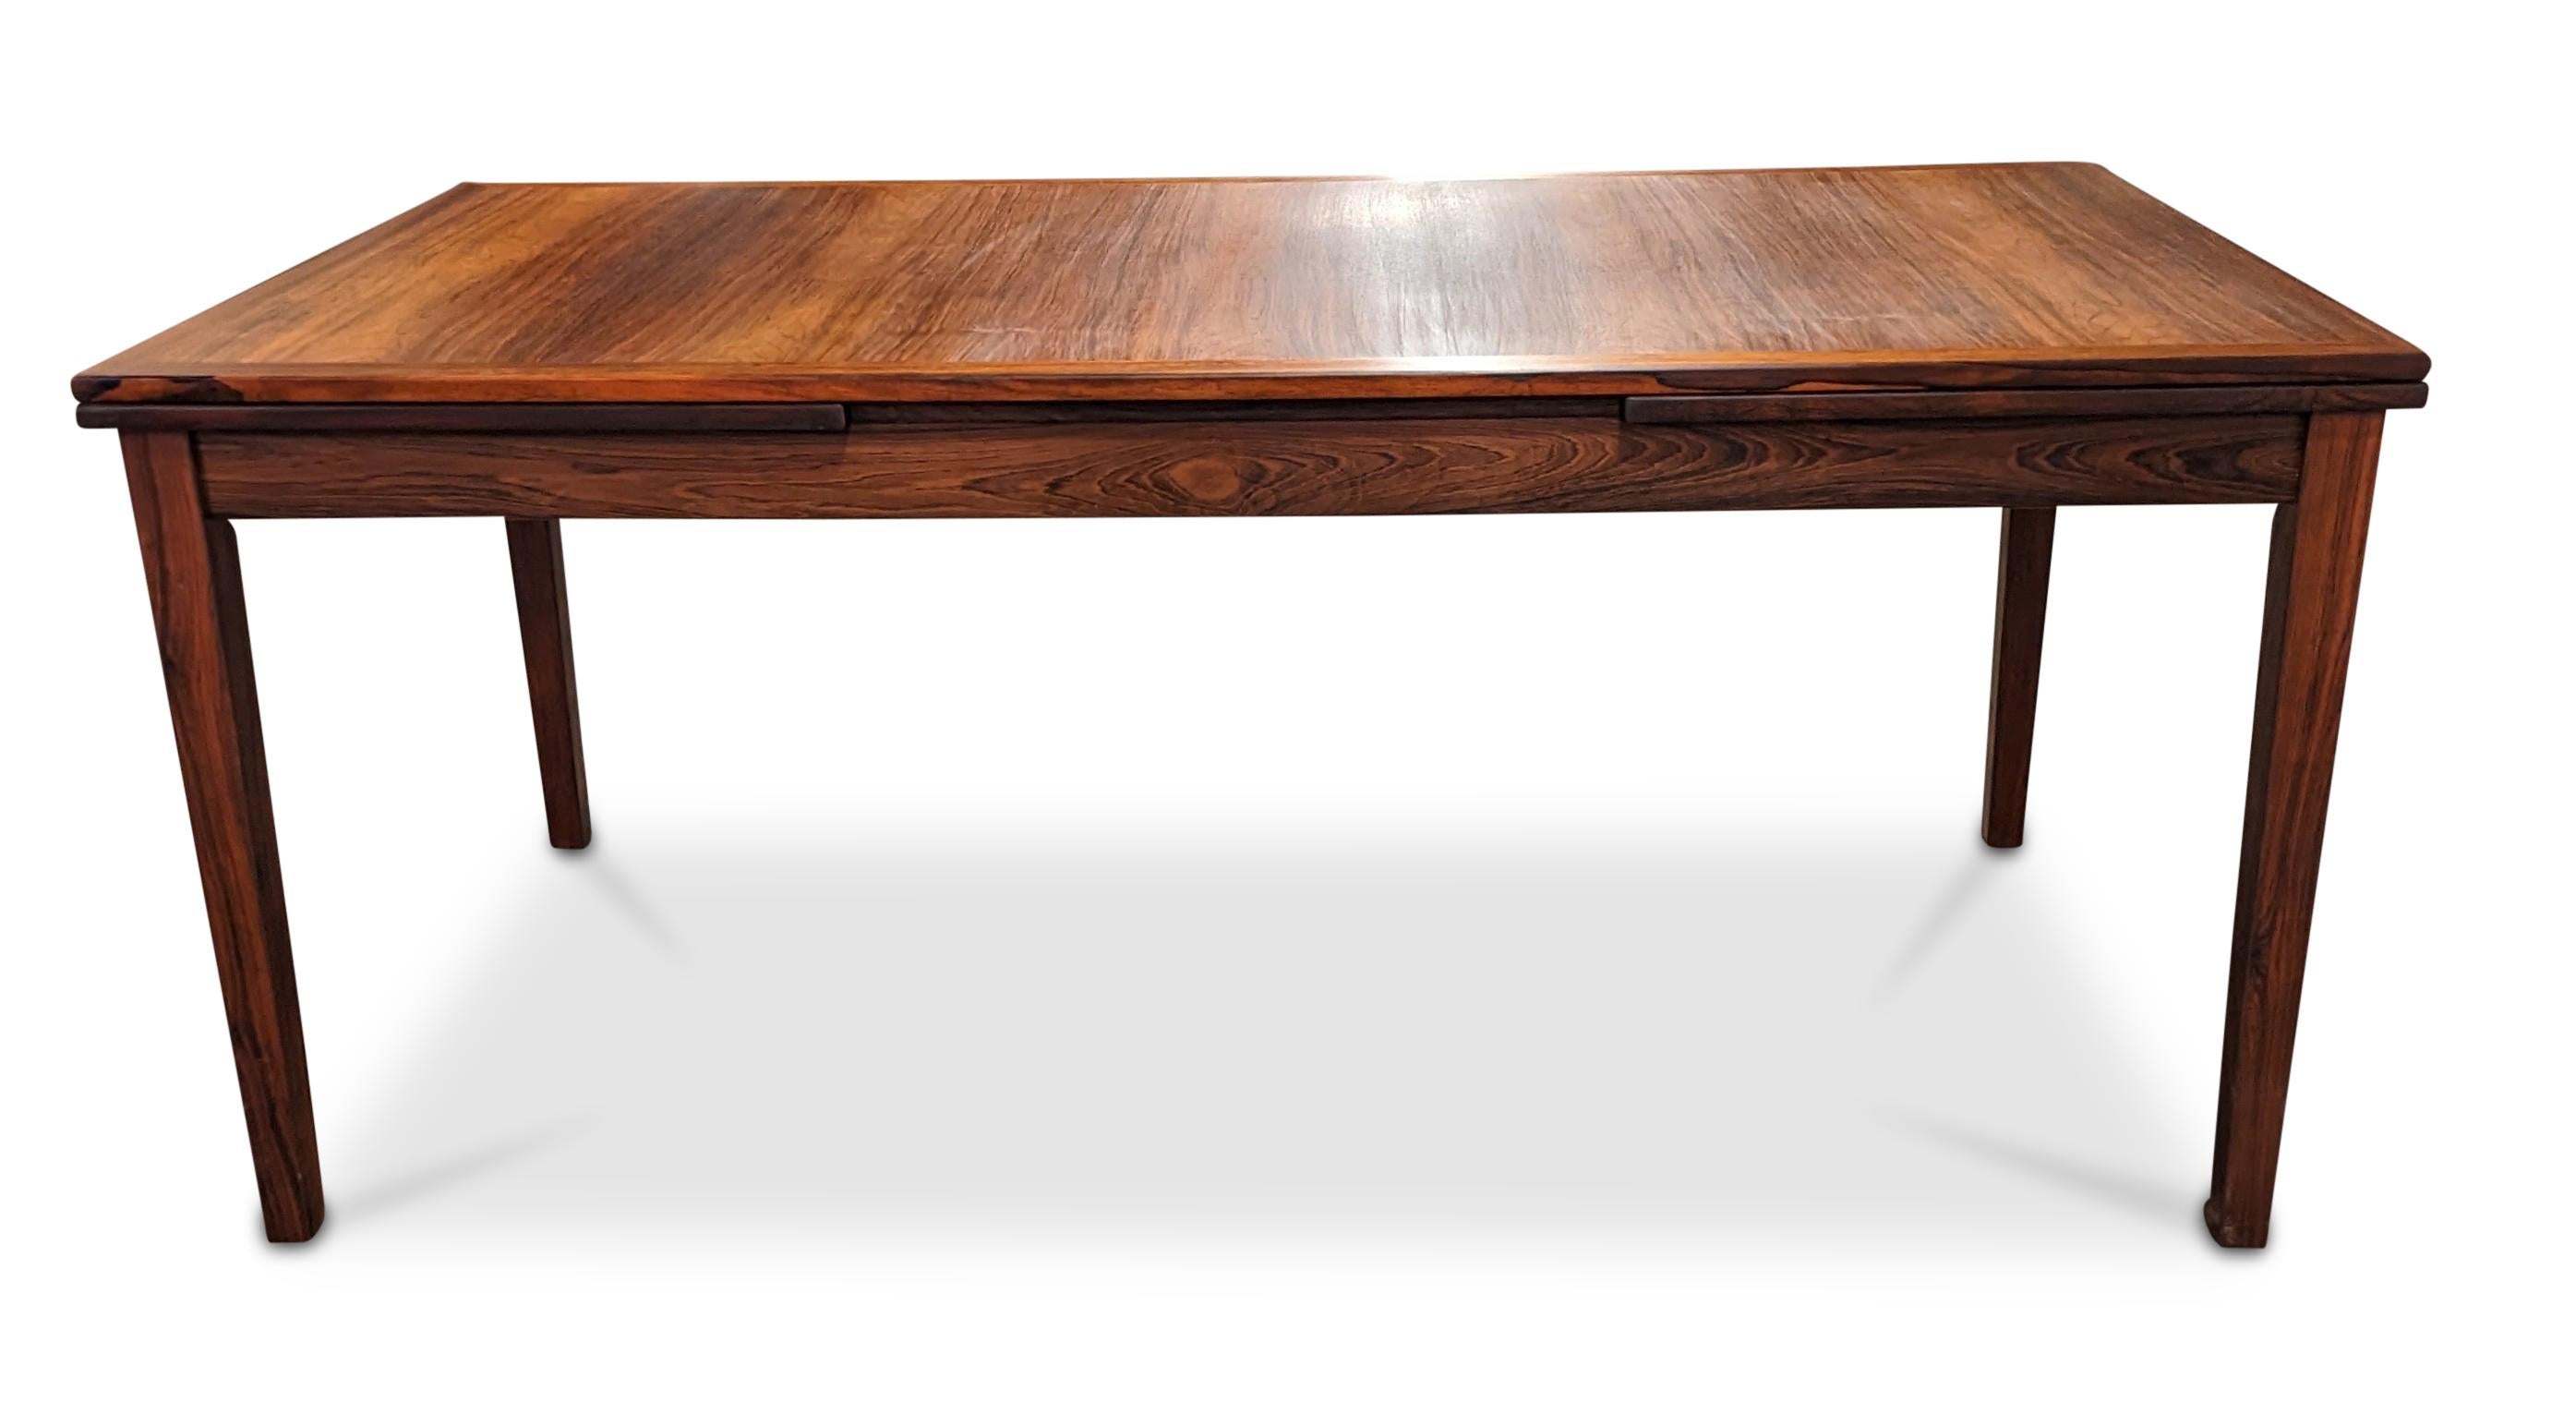 Kai Winding Rosewood Dining Table w Two Hidden Leaves, Vintage Danish 122299 6